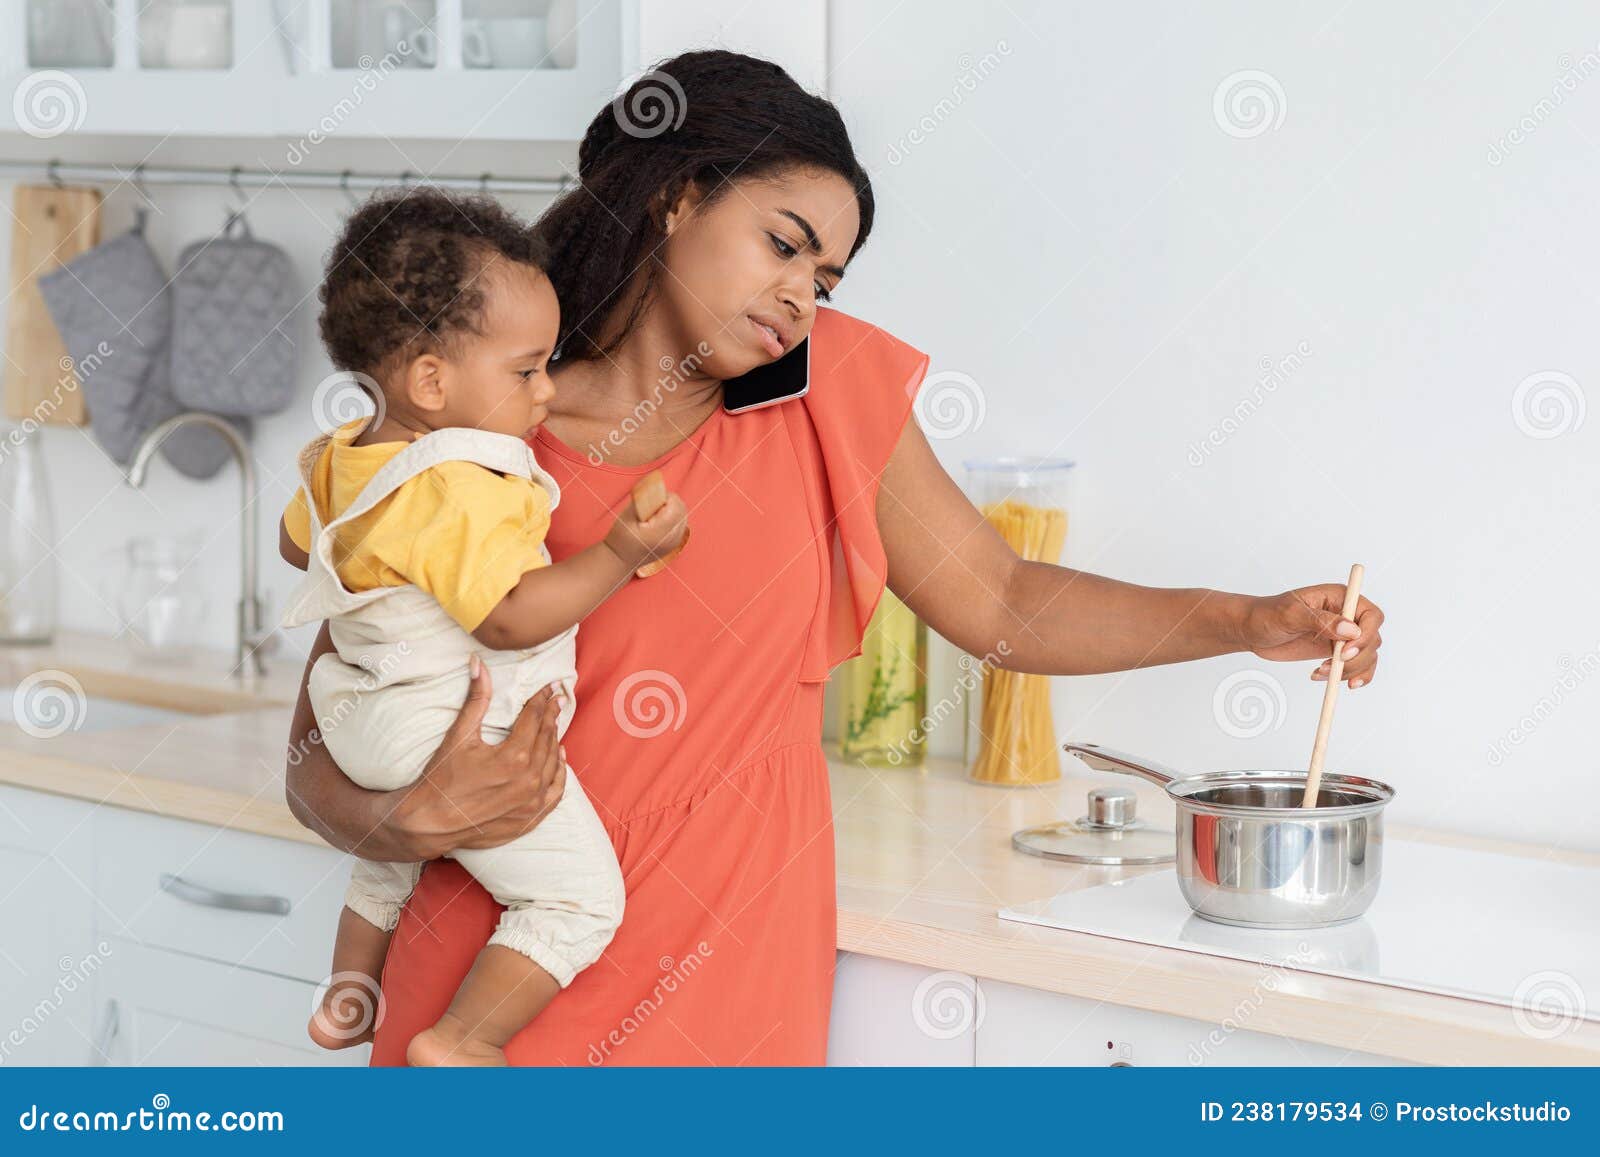 https://thumbs.dreamstime.com/z/stressed-young-black-woman-multitasking-kitchen-baby-hands-stressed-young-black-woman-multitasking-kitchen-baby-238179534.jpg